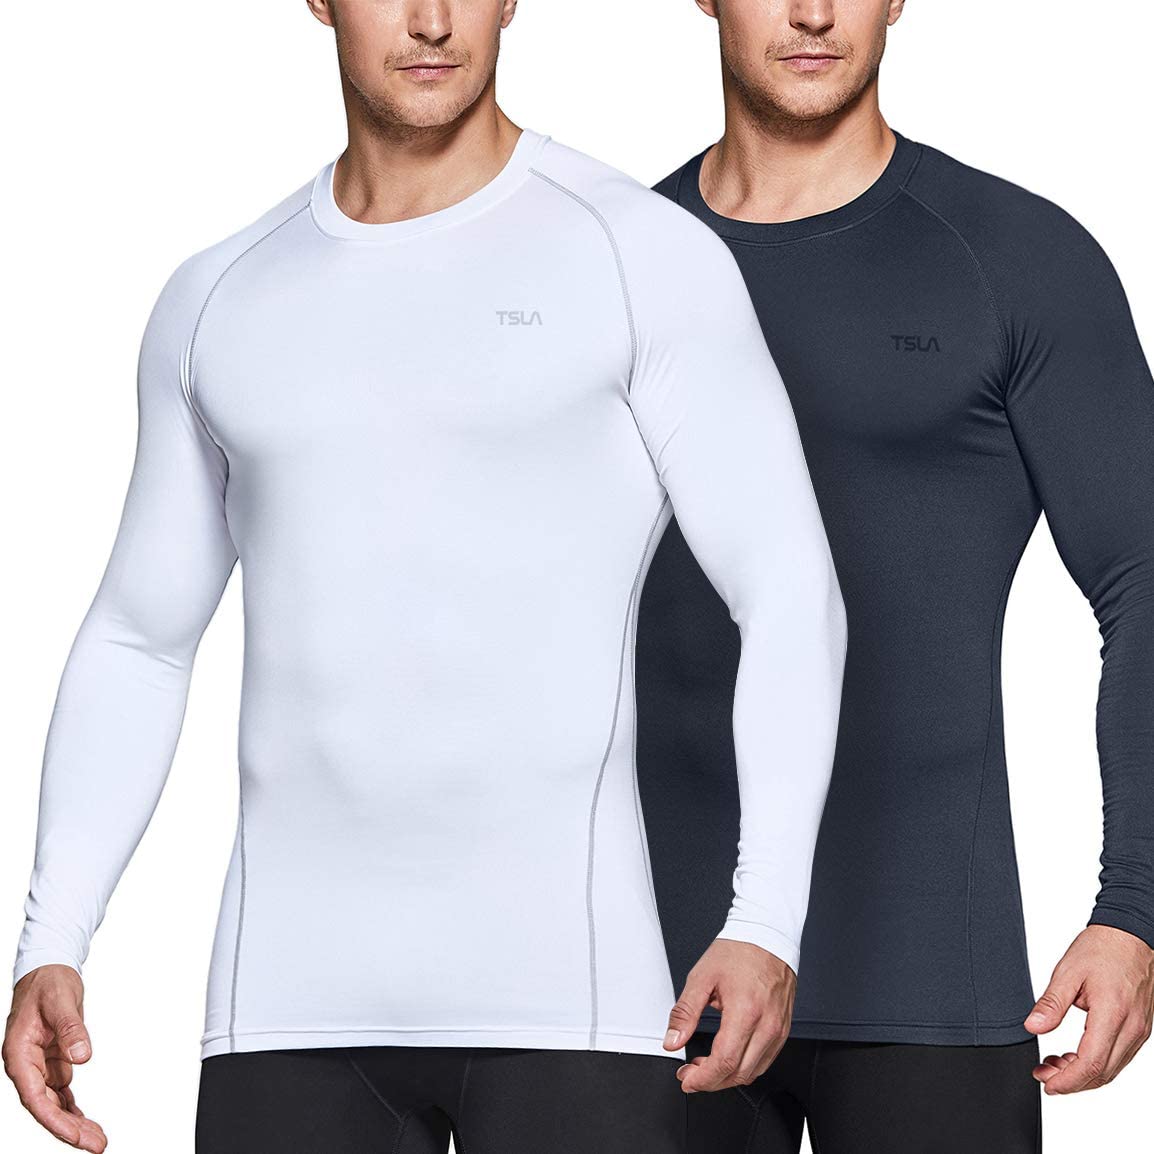 Winter Gear Running T-Shirt TSLA 1 or 2 Pack Men's Thermal Long Sleeve Compression Shirts Athletic Base Layer Top